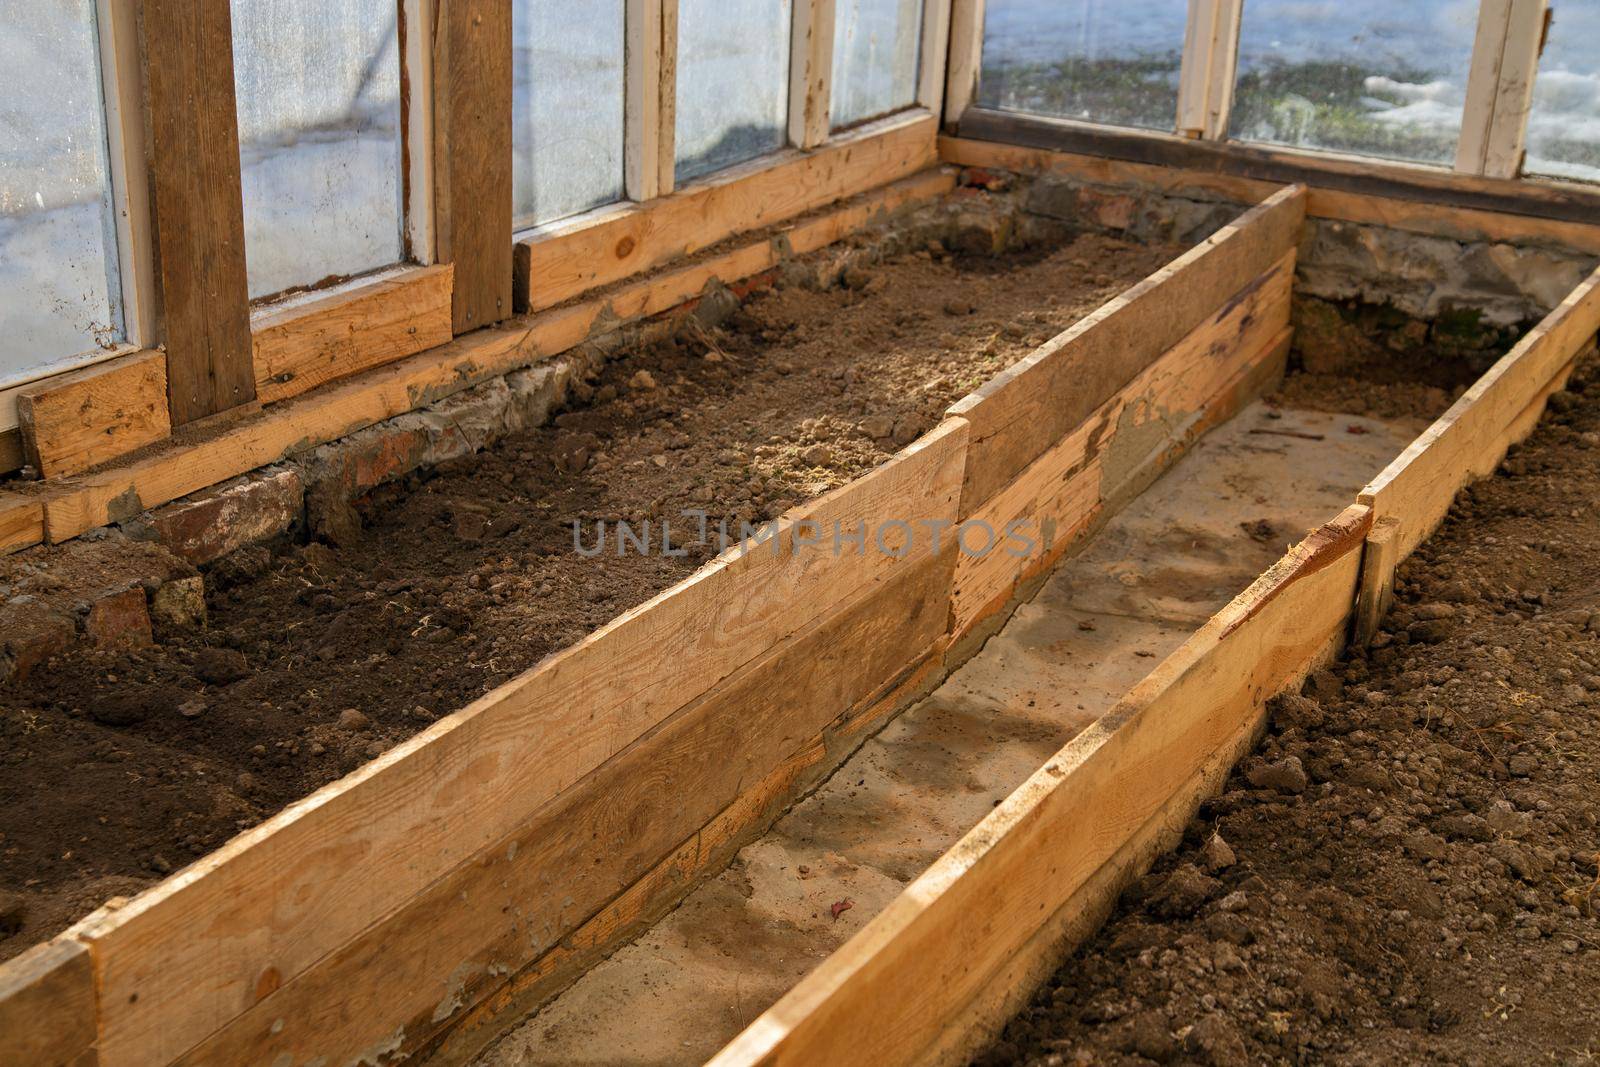 Separated by boards, beds with wet ground in makeshift greenhouse.